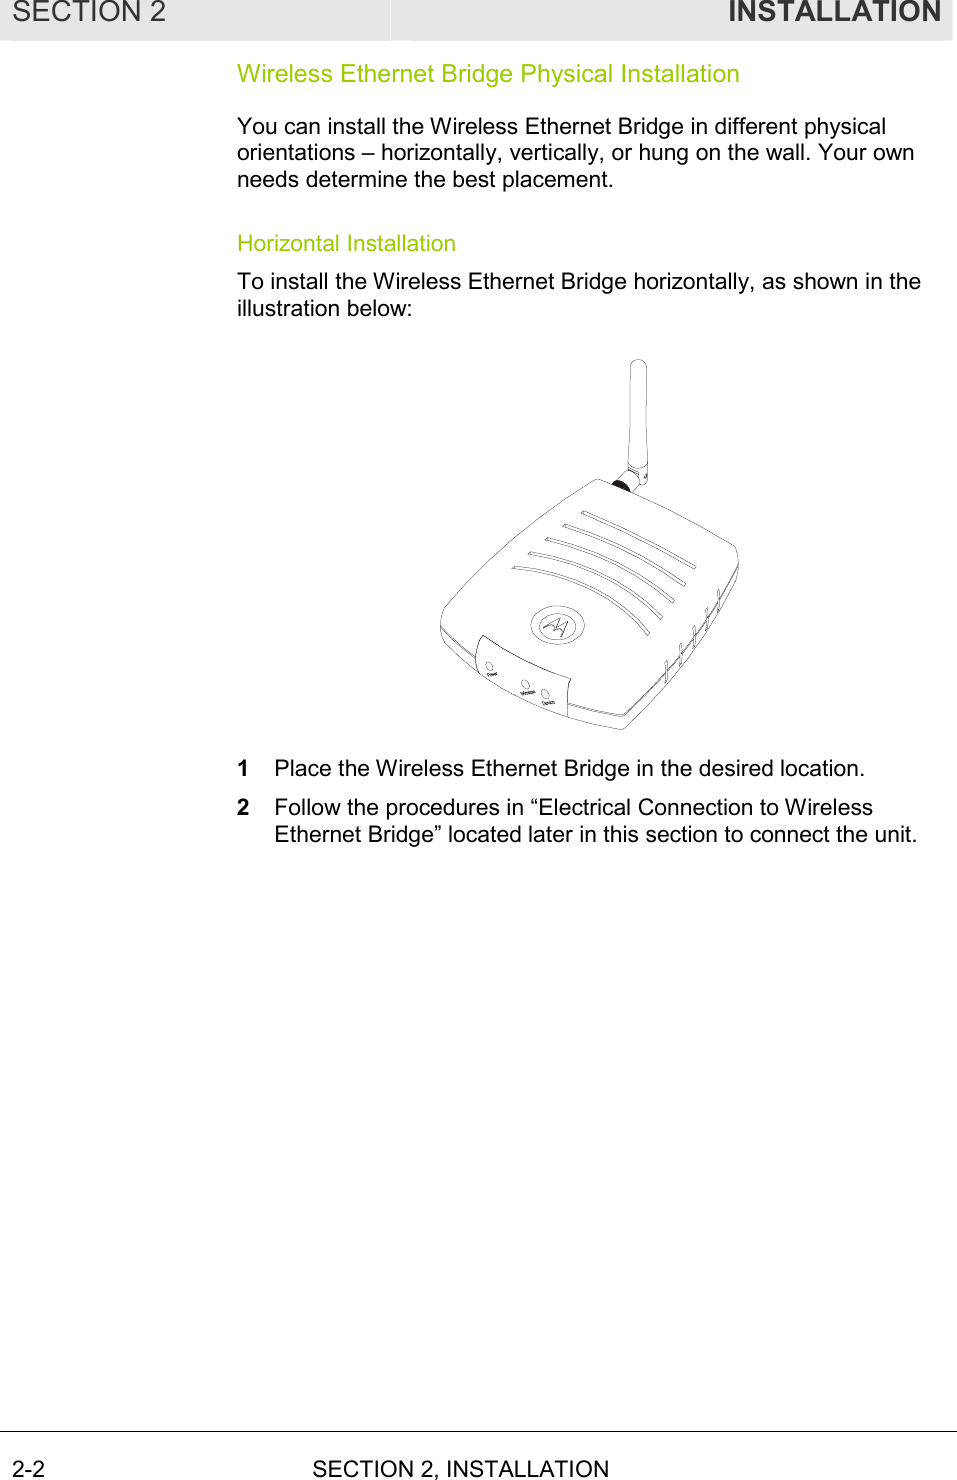 SECTION 2  INSTALLATION 2-2 SECTION 2, INSTALLATION  Wireless Ethernet Bridge Physical Installation You can install the Wireless Ethernet Bridge in different physical orientations – horizontally, vertically, or hung on the wall. Your own needs determine the best placement. Horizontal Installation To install the Wireless Ethernet Bridge horizontally, as shown in the illustration below:  1  Place the Wireless Ethernet Bridge in the desired location. 2  Follow the procedures in “Electrical Connection to Wireless Ethernet Bridge” located later in this section to connect the unit. 